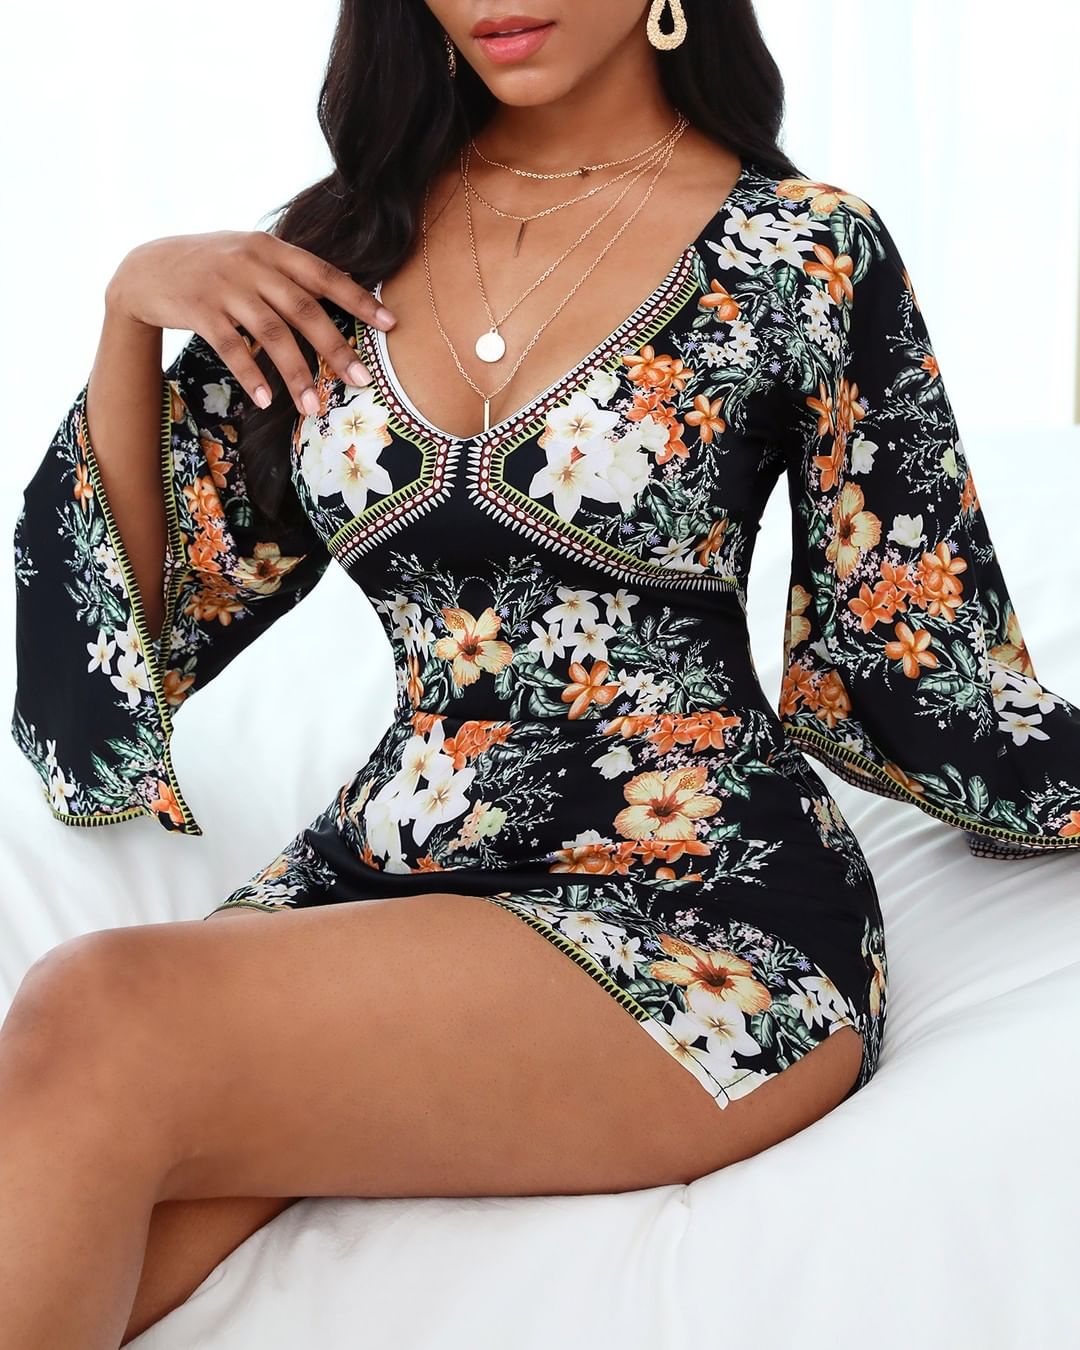 boutiquefeel_official - Long Sleeve Floralt Deep V Dress⁠
Click https://www.boutiquefeel.com to ⁠
search LZR5251get size and price details ⁠
 #love #photo #fashion